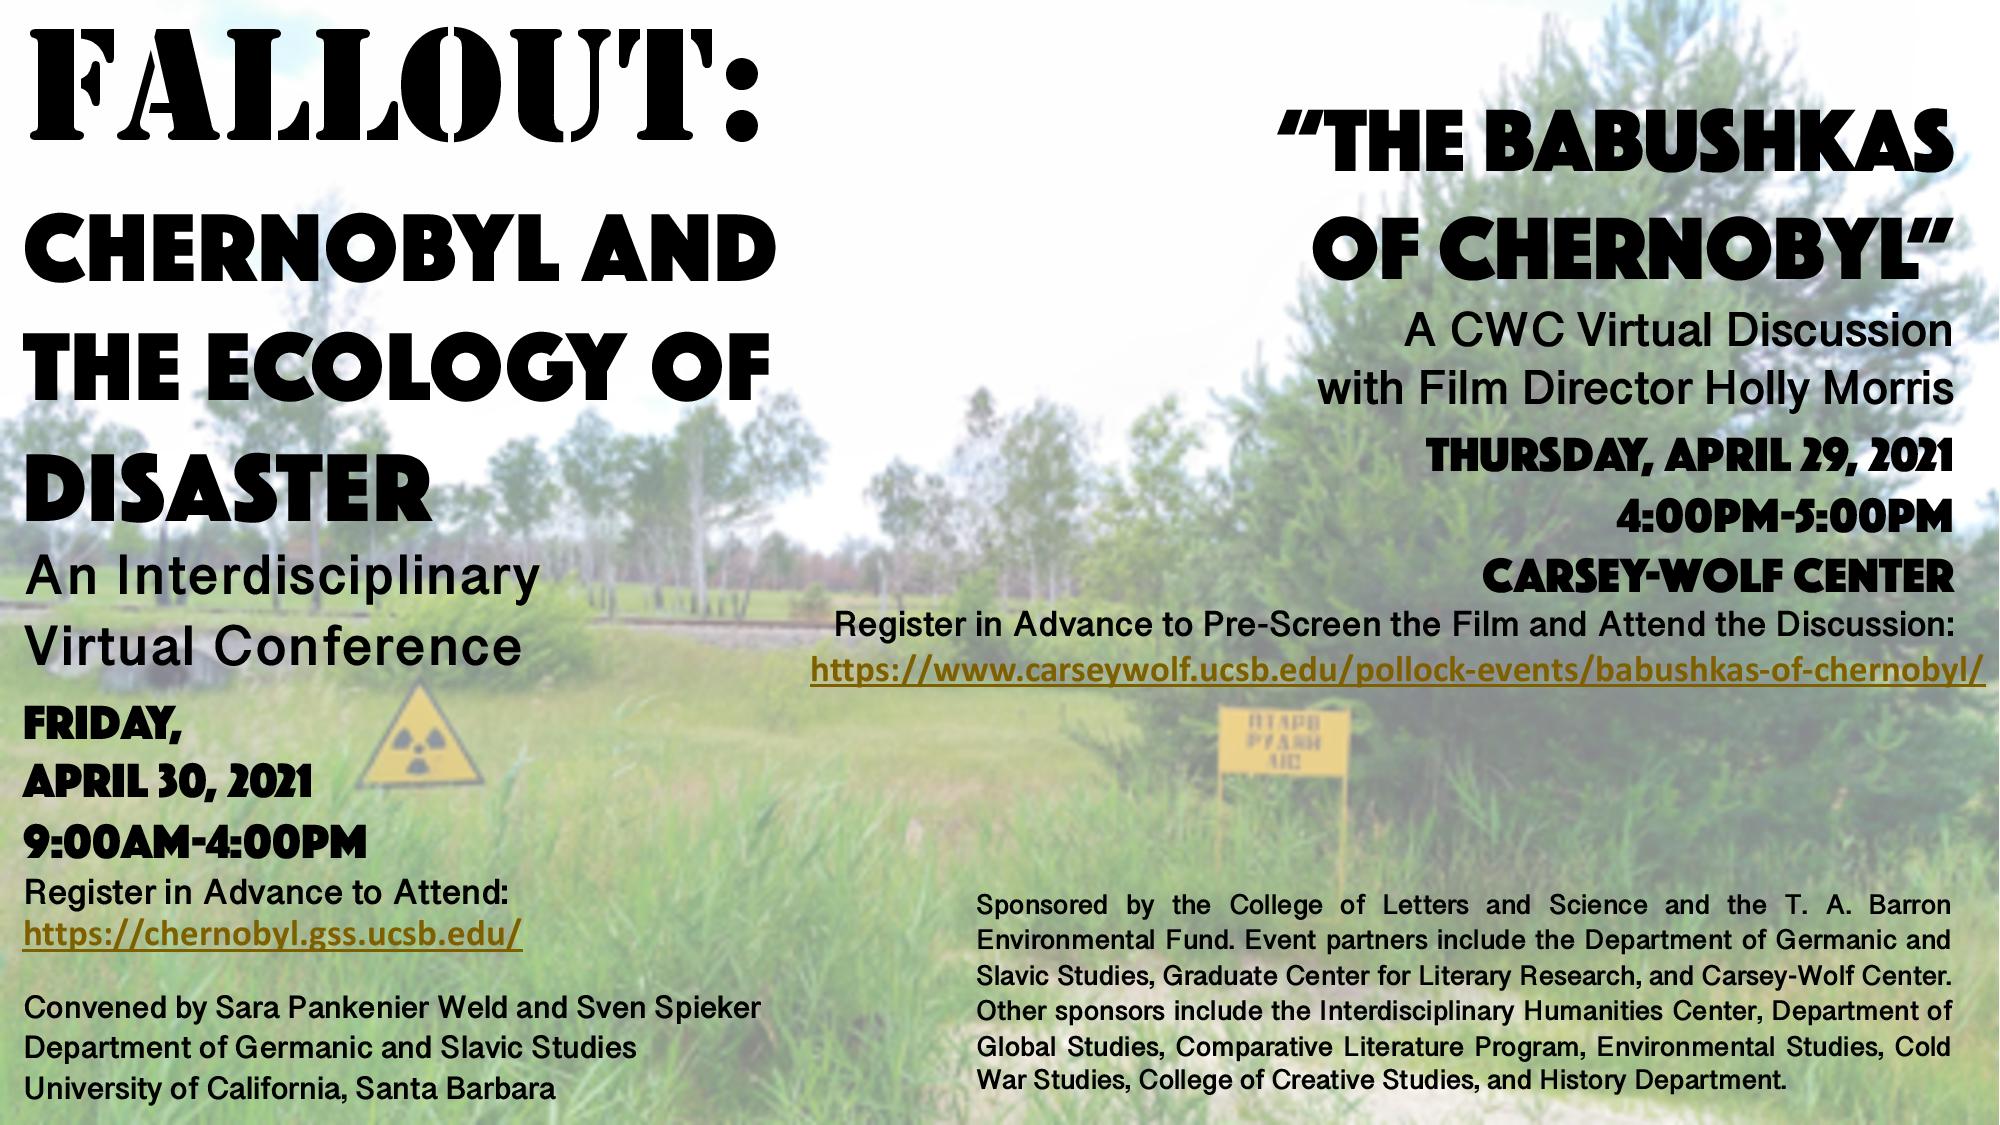 Flyer for Virtual Conference for Fallout: Chernobyl and the Ecology of Disaster on 4/29/21 from 4PM-5PM